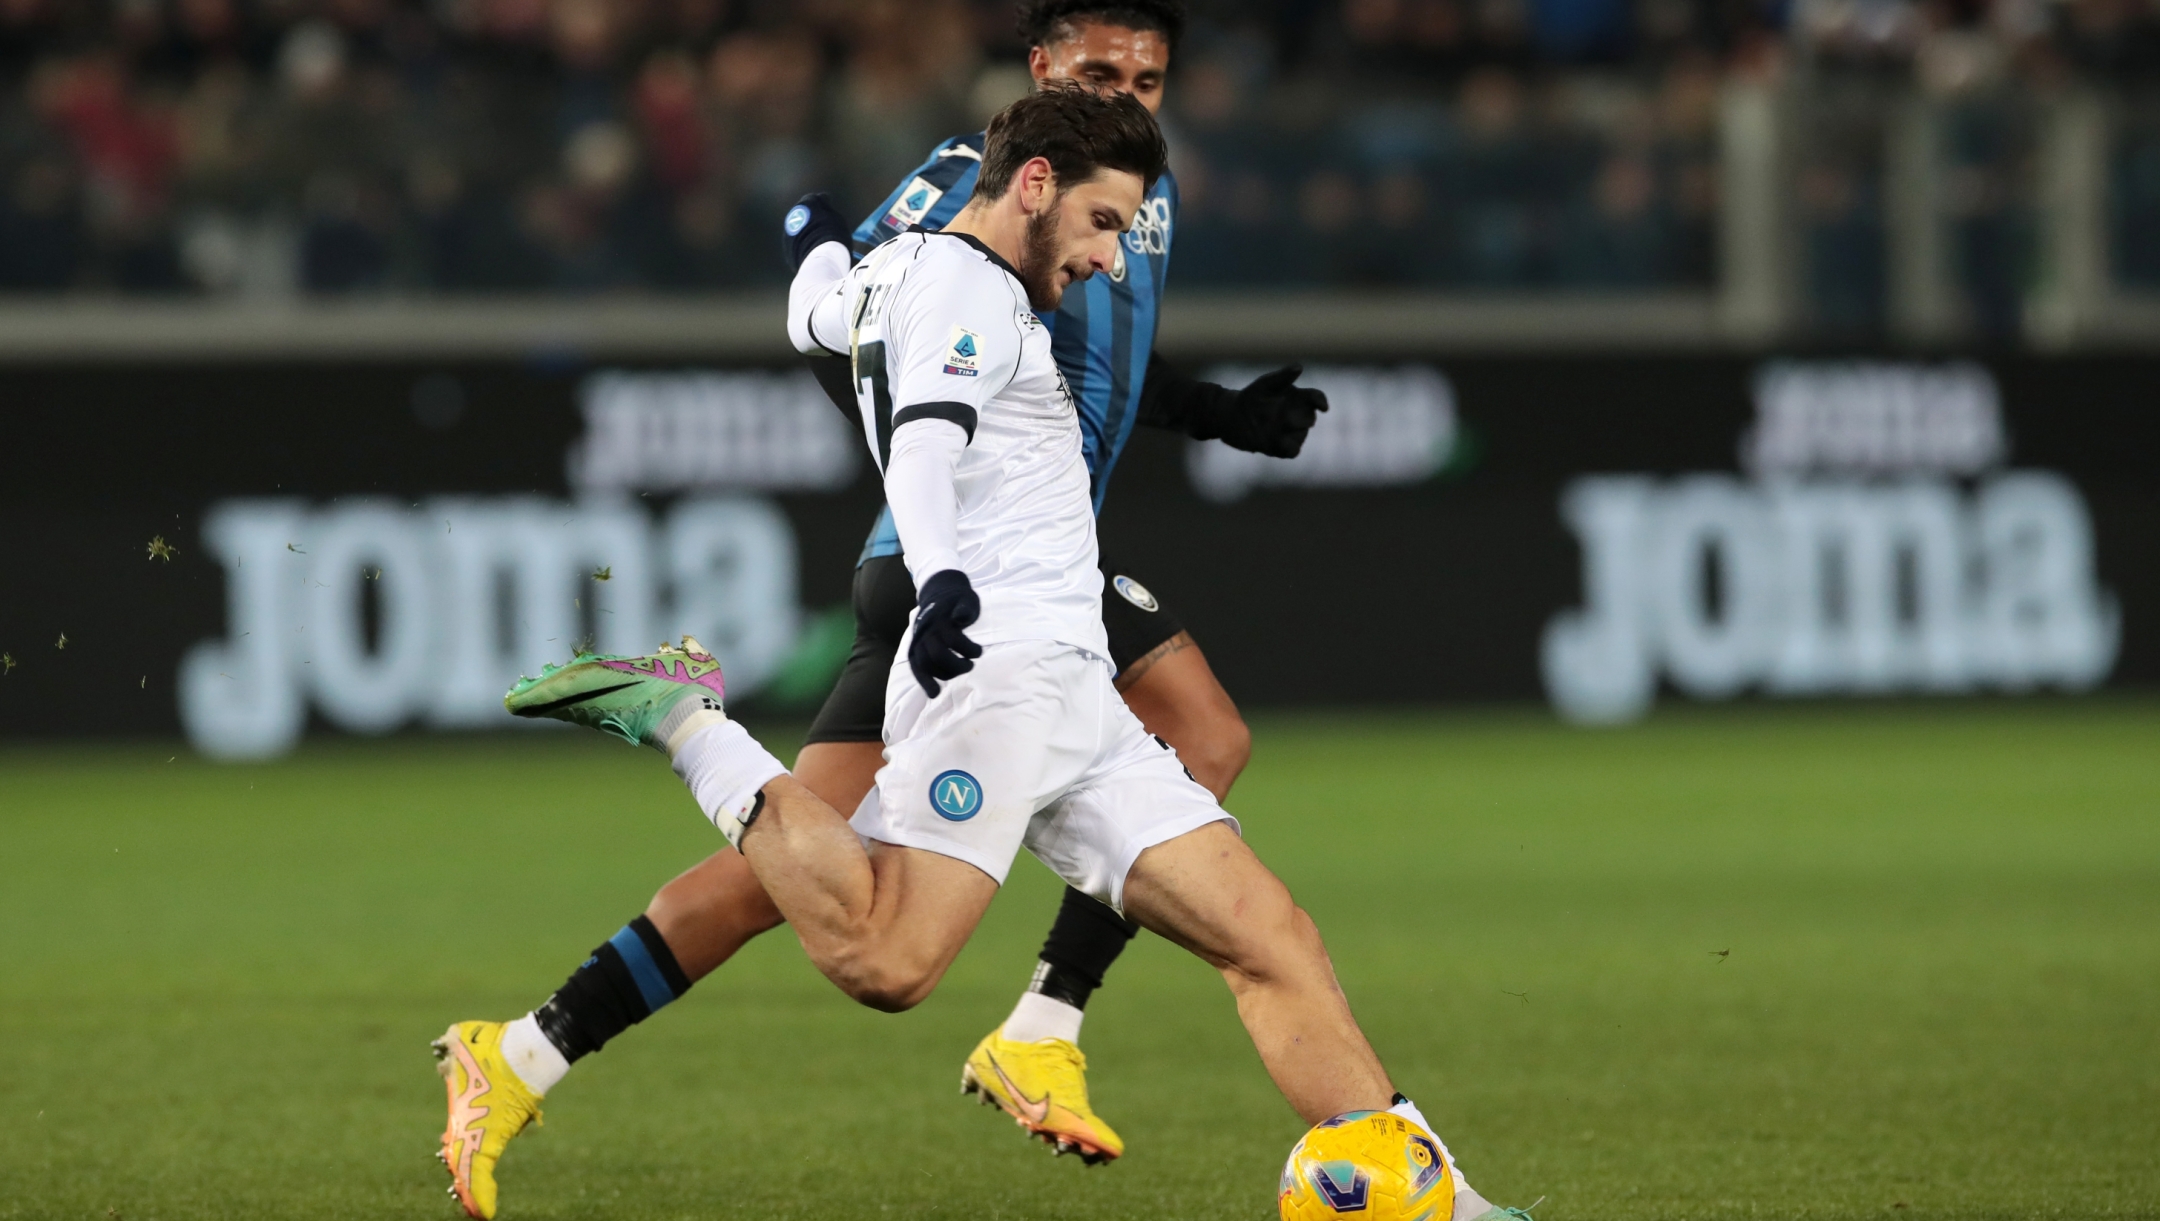 BERGAMO, ITALY - NOVEMBER 25: Khvicha Kvaratskhelia of SSC Napoli runs with the ball whilst under pressure from Ederson of Atalanta BC during the Serie A TIM match between Atalanta BC and SSC Napoli at Gewiss Stadium on November 25, 2023 in Bergamo, Italy. (Photo by Emilio Andreoli/Getty Images)